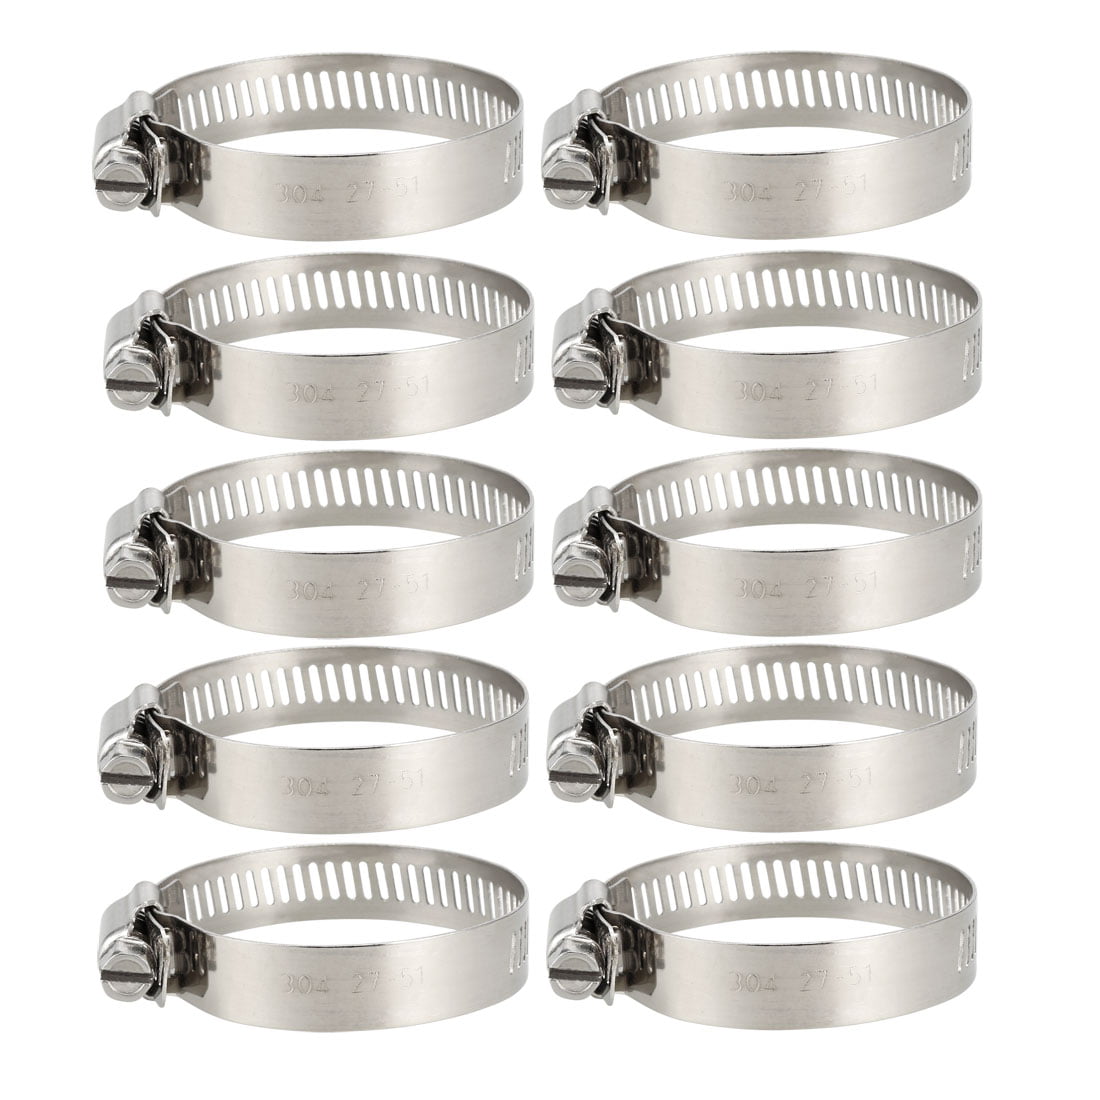 27mm-51mm Clamping Range 304 Stainless Steel Butterfly Hose Clamp 10pcs 